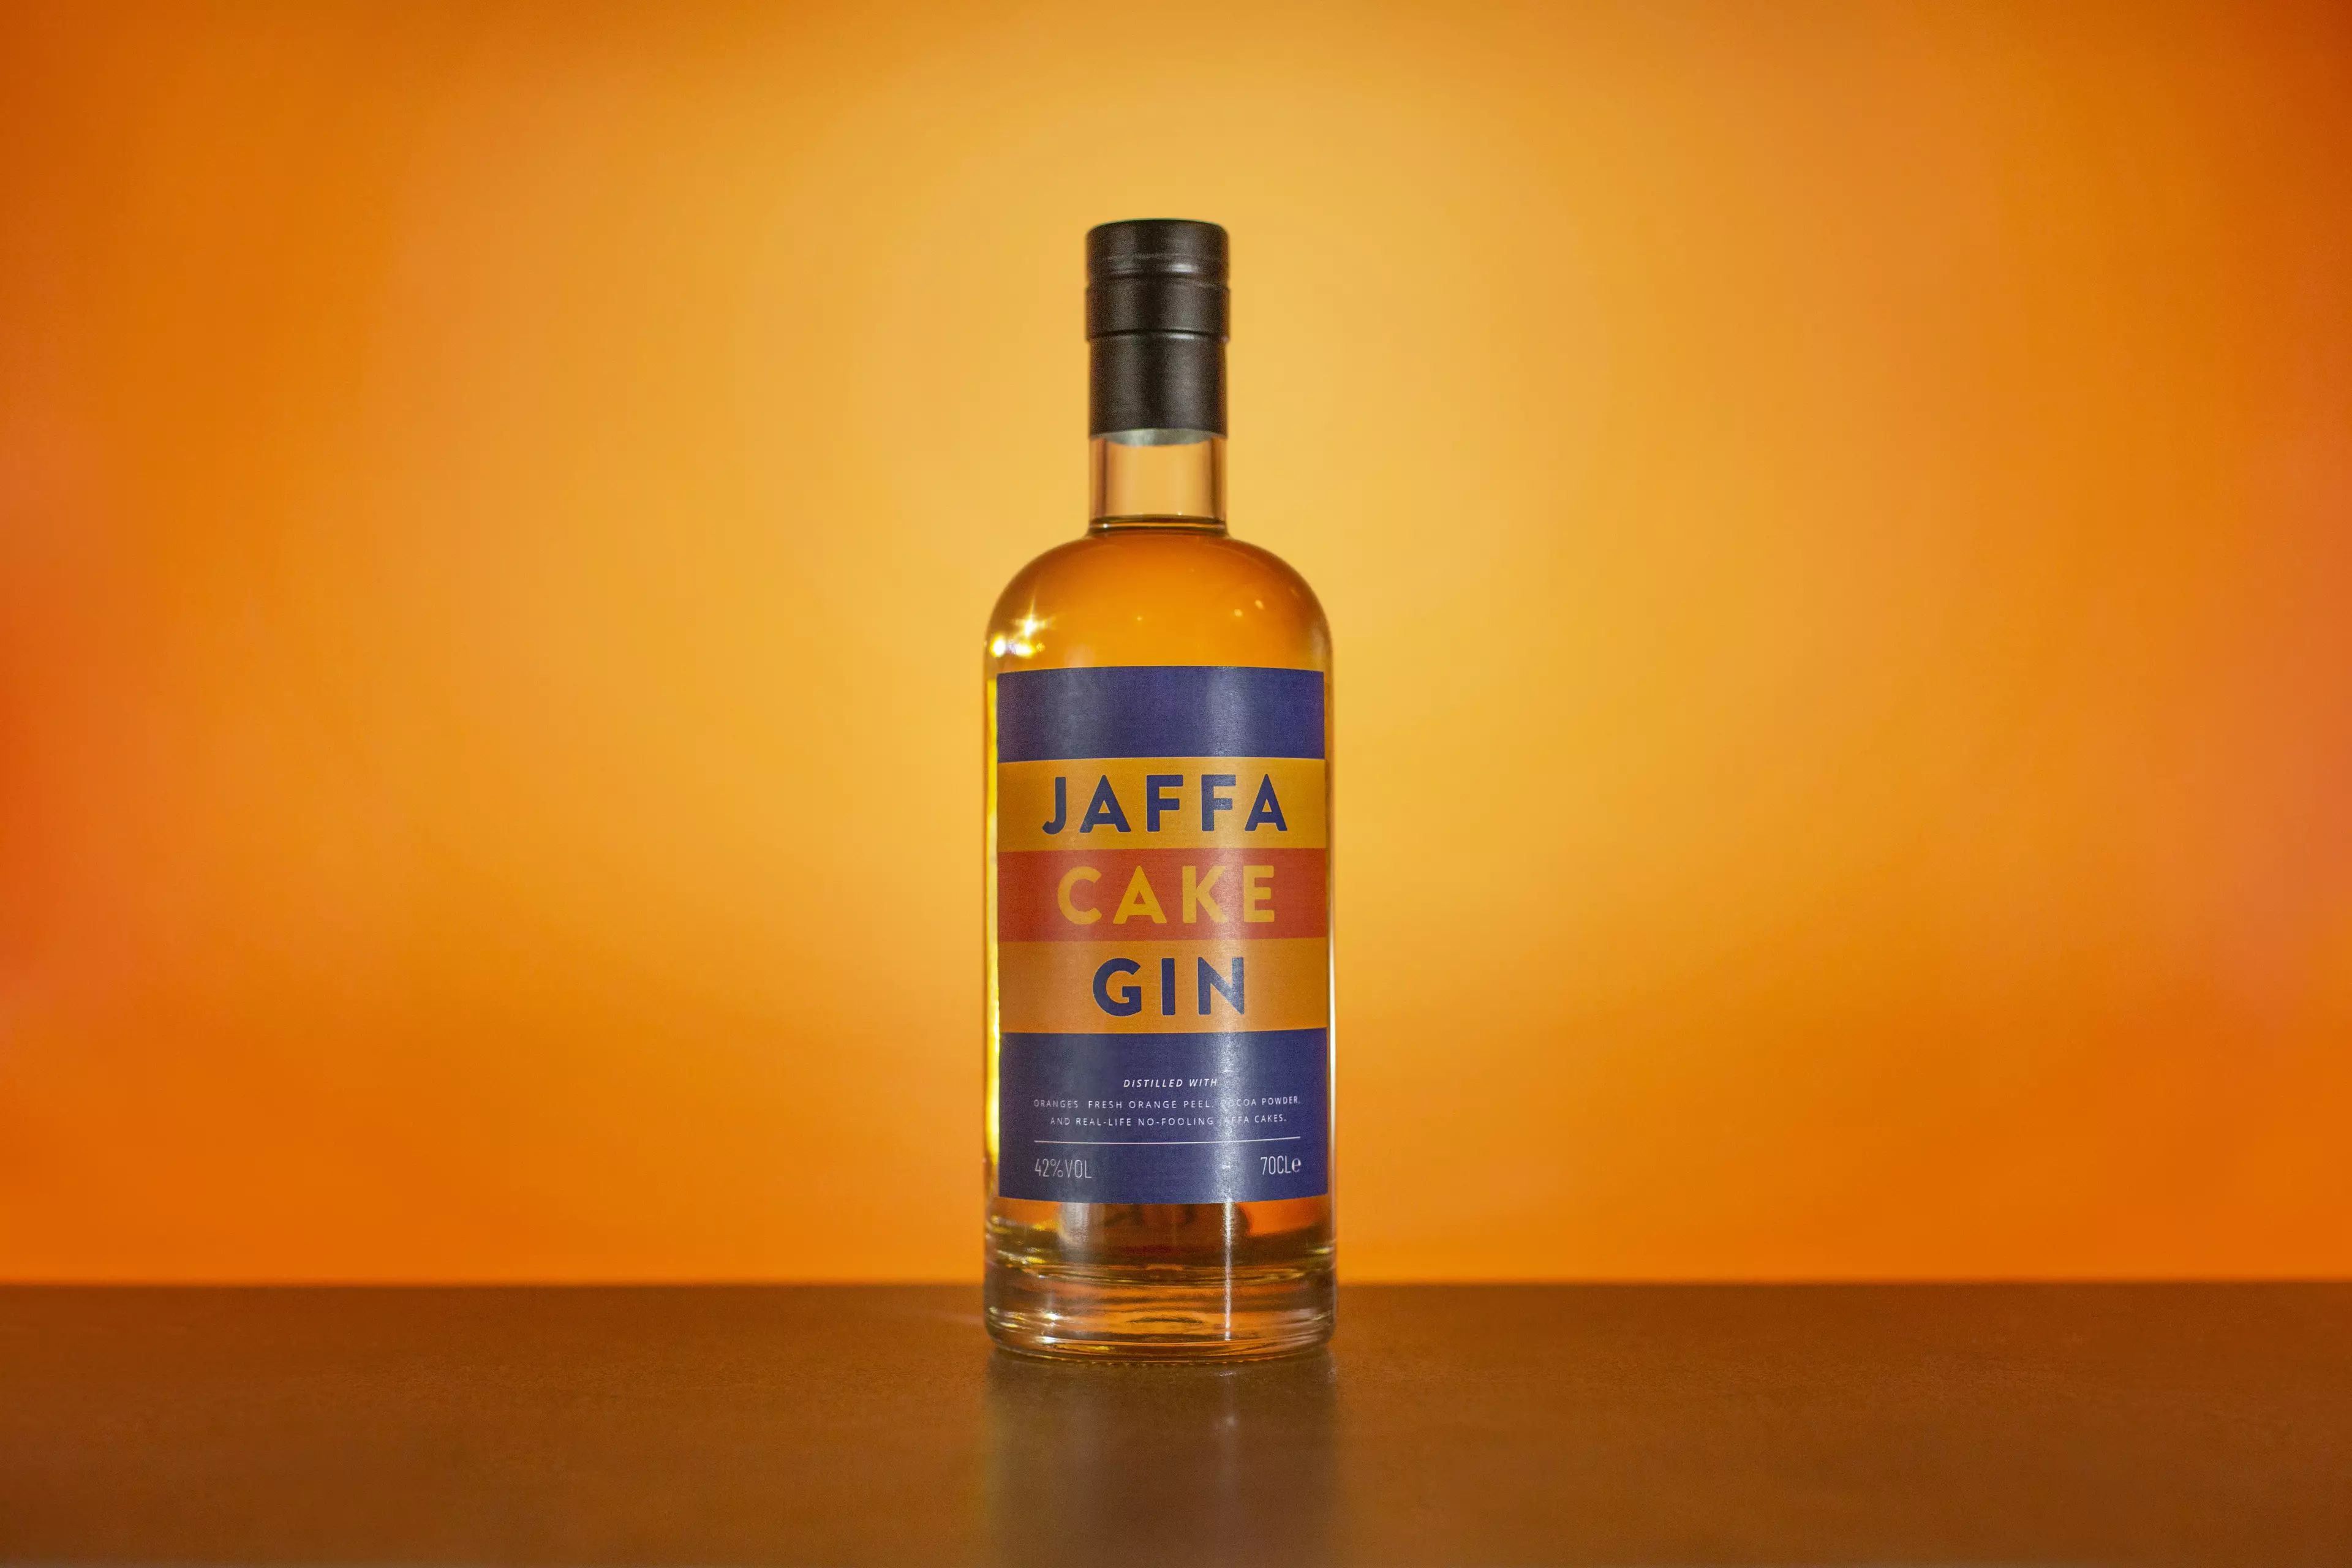 The gin is distilledwith oranges, fresh orange peel, cocoa powder and real-life Jaffa Cakes (